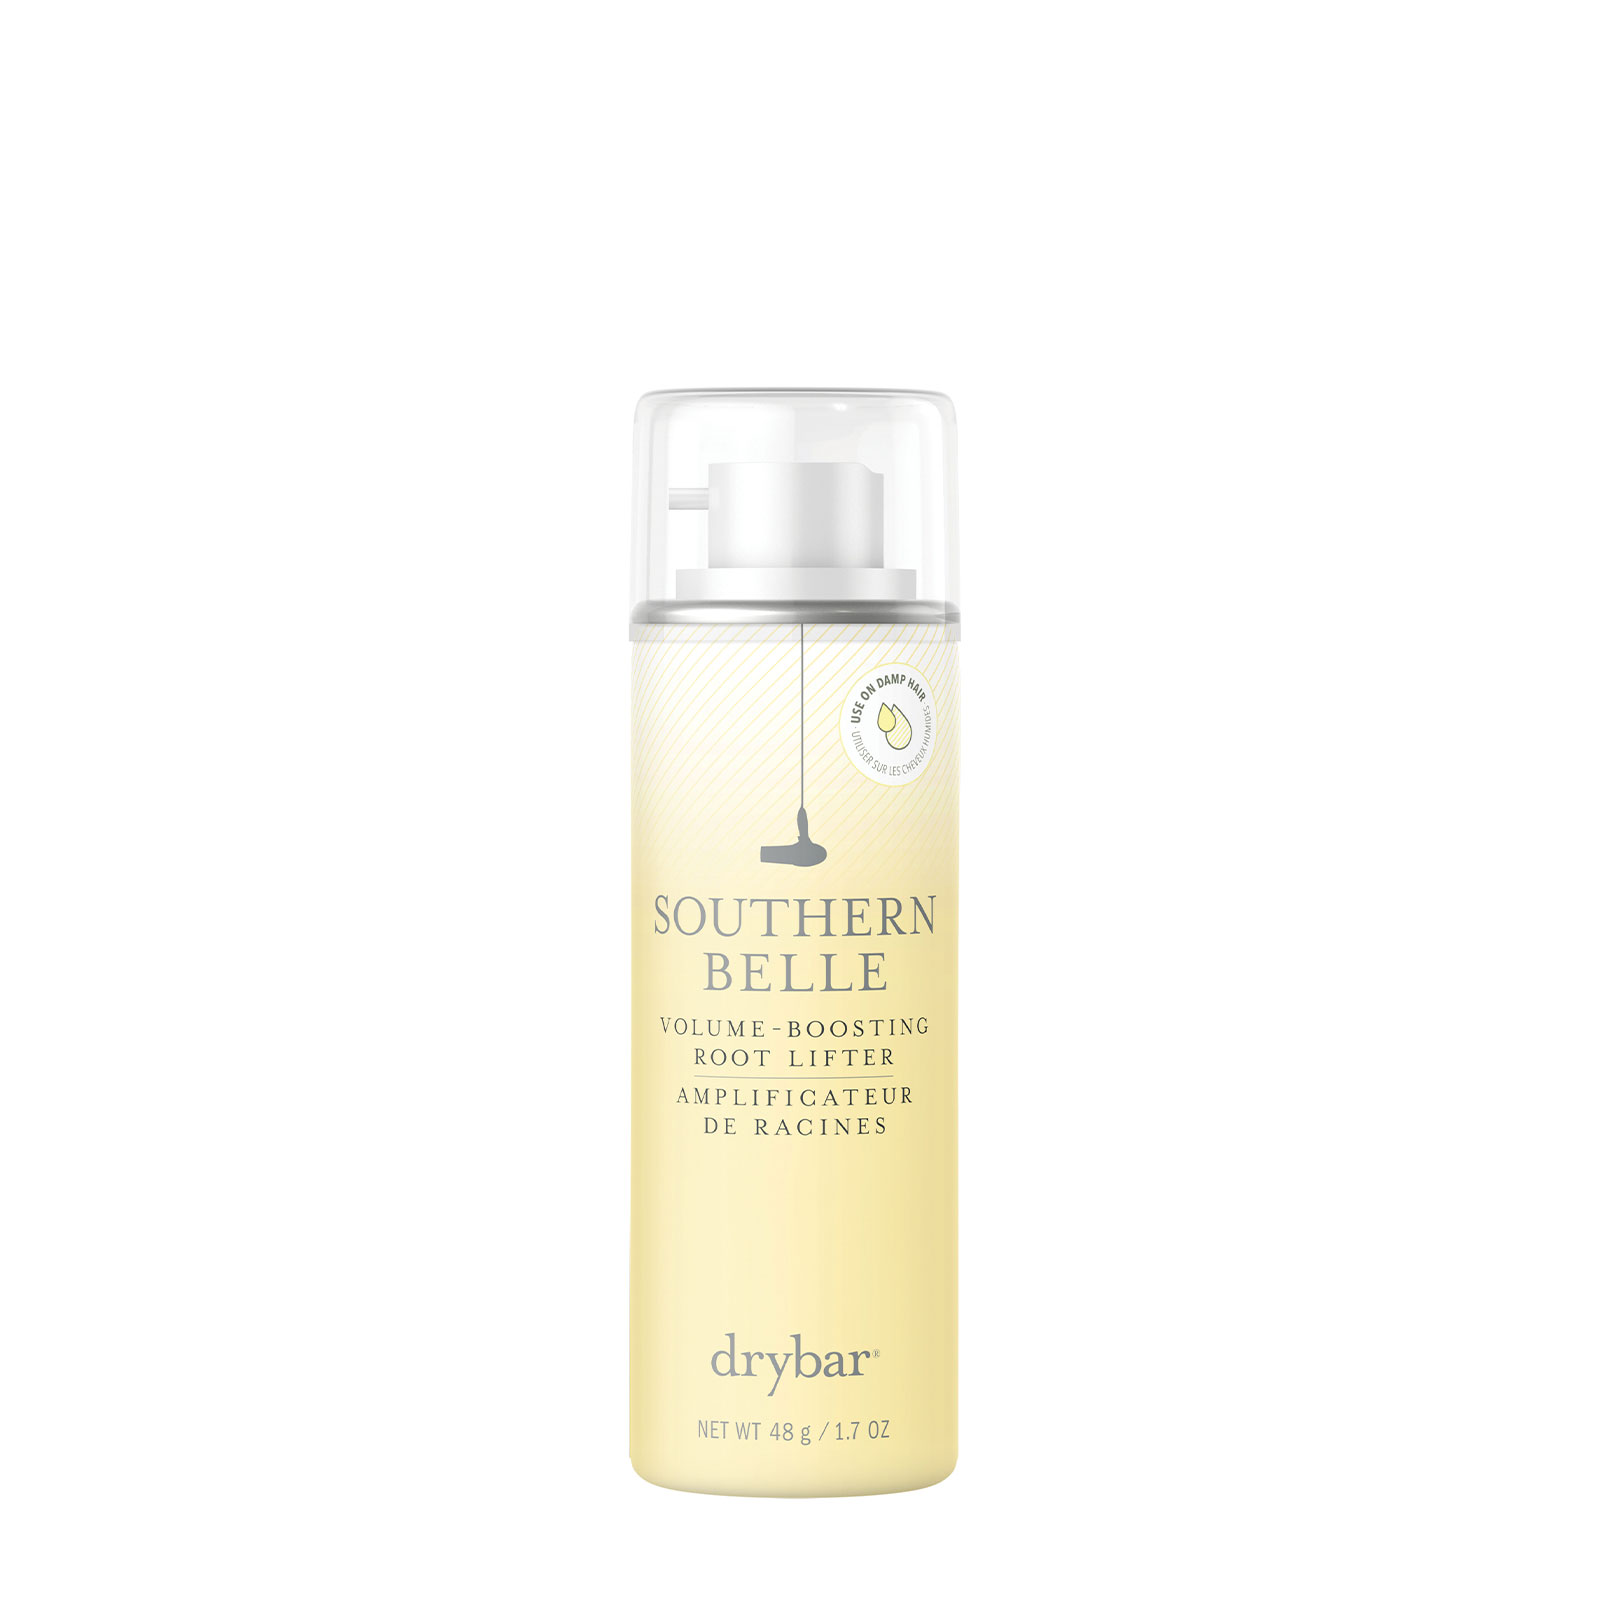 Drybar Southern Belle Volume-Boosting Root Lifter Travel Size 48G